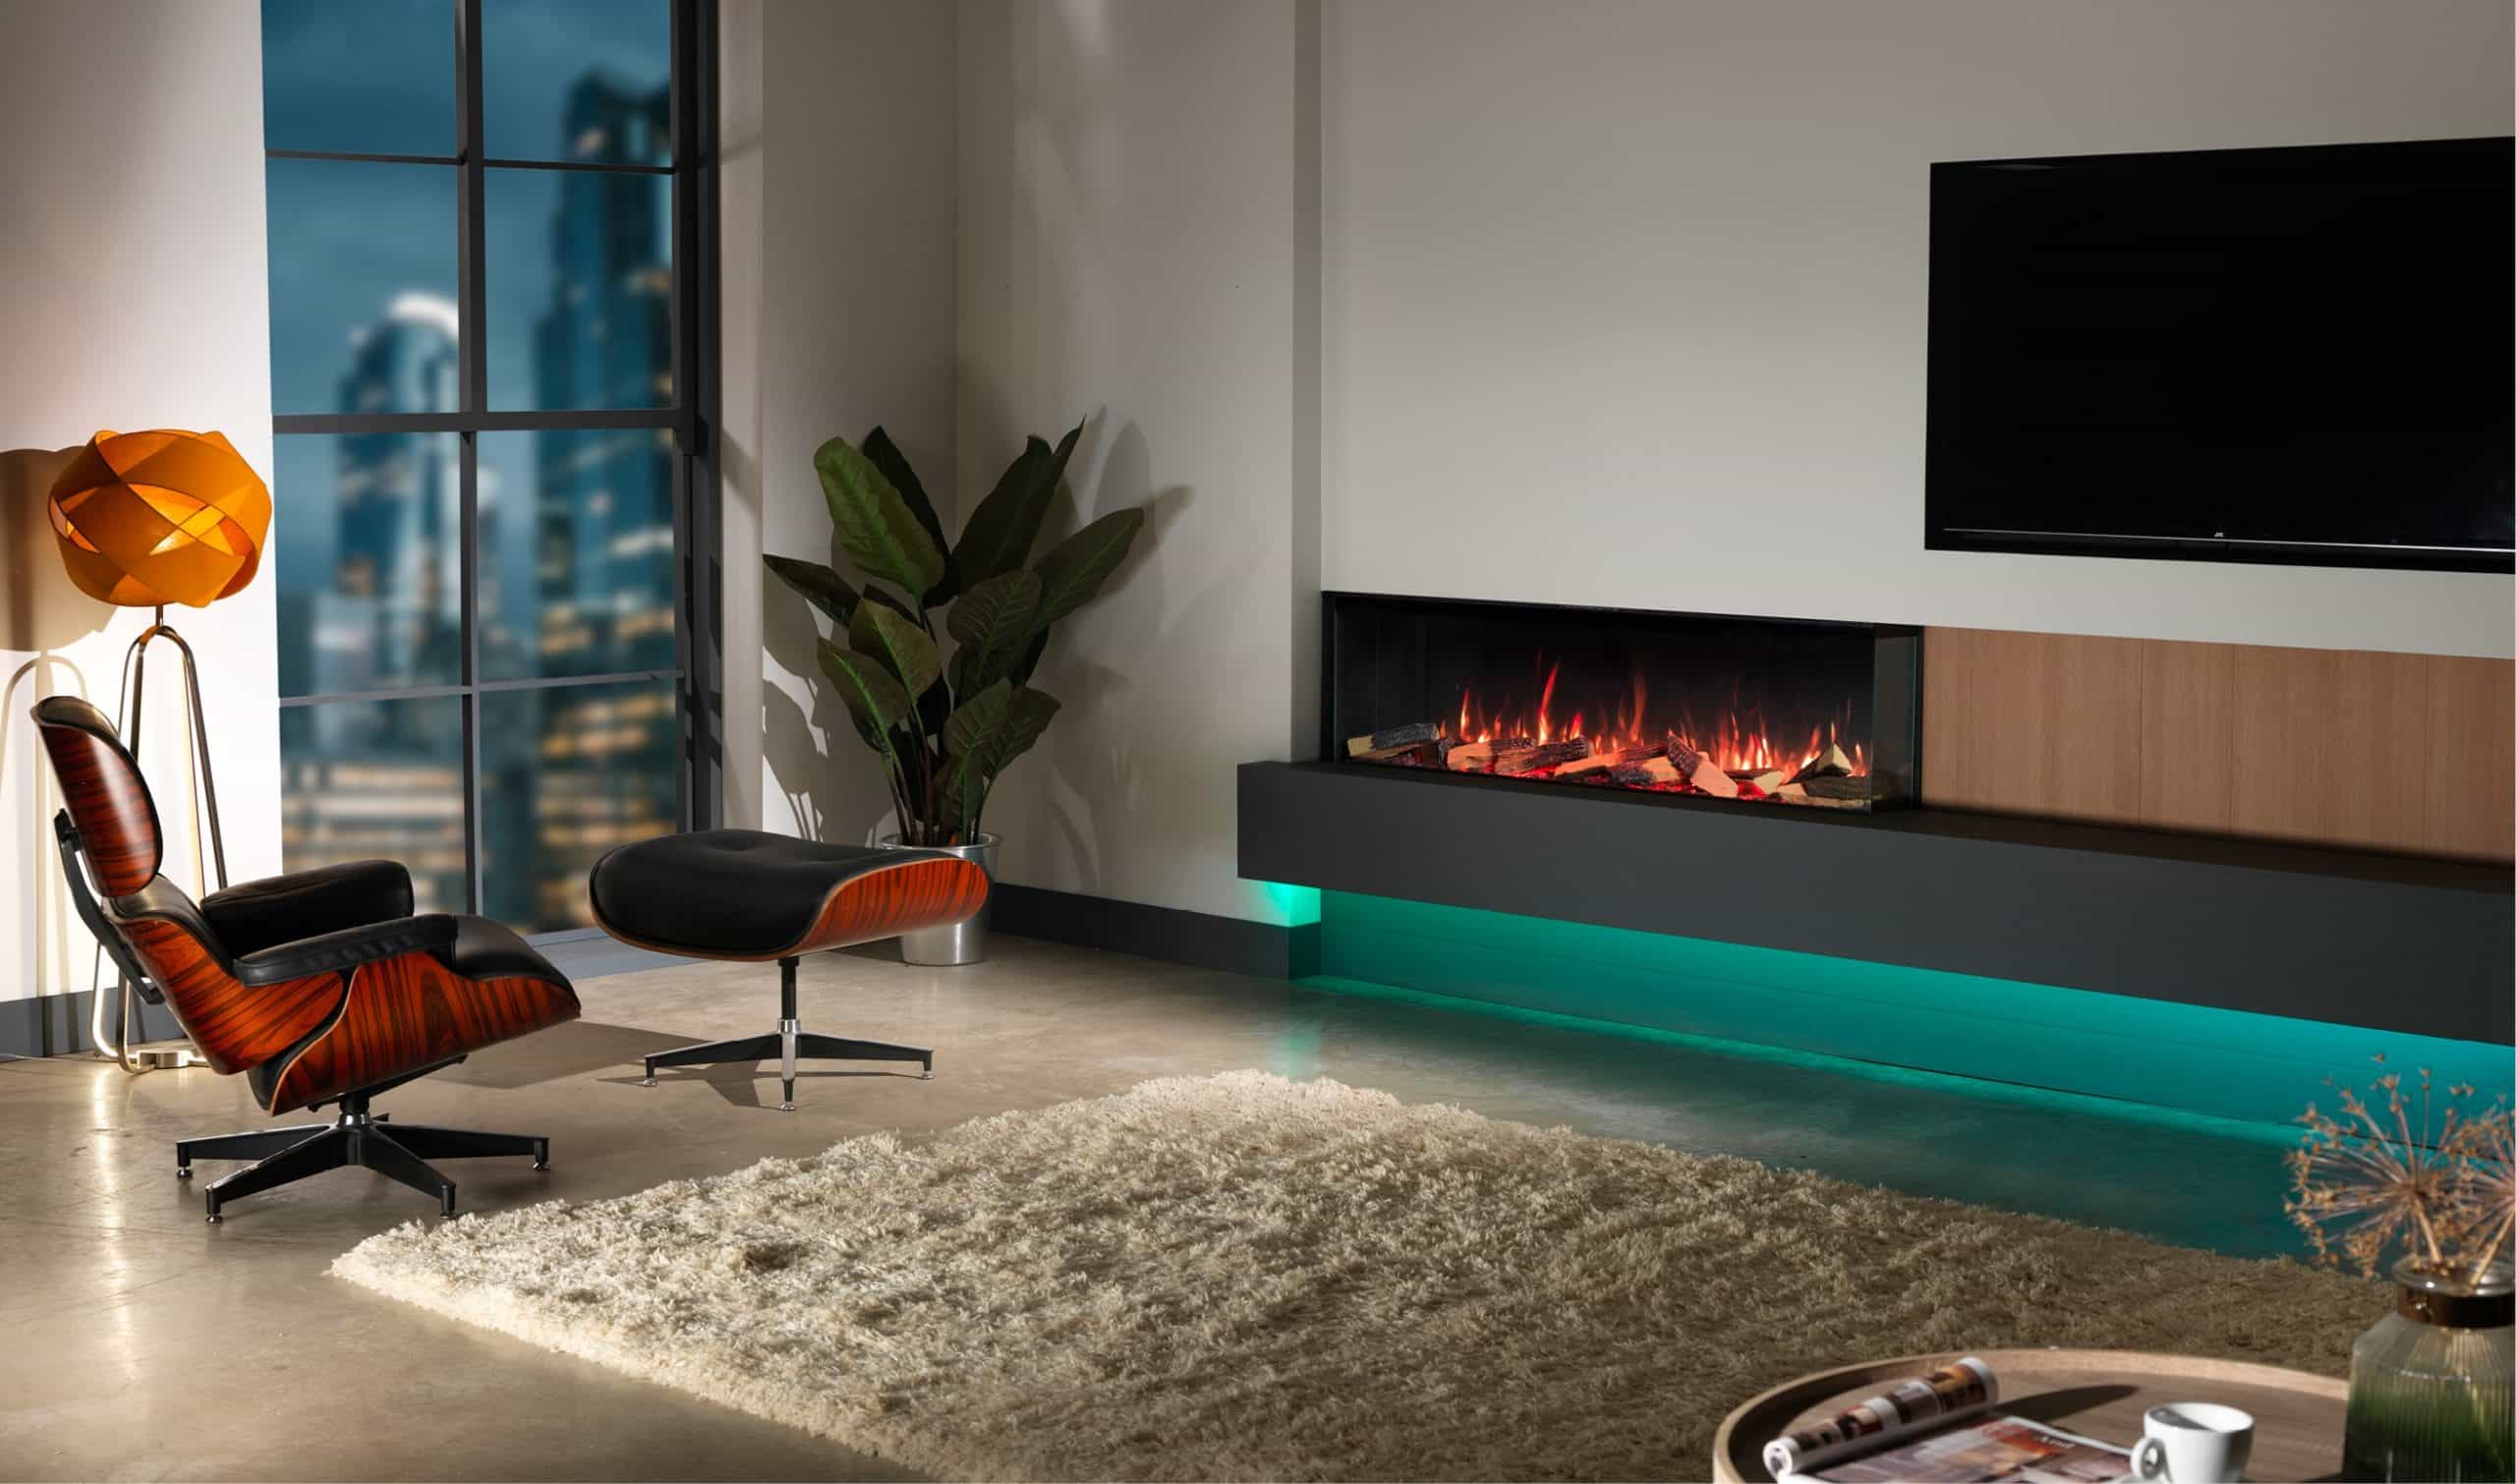 ambient lighting on an electric fire